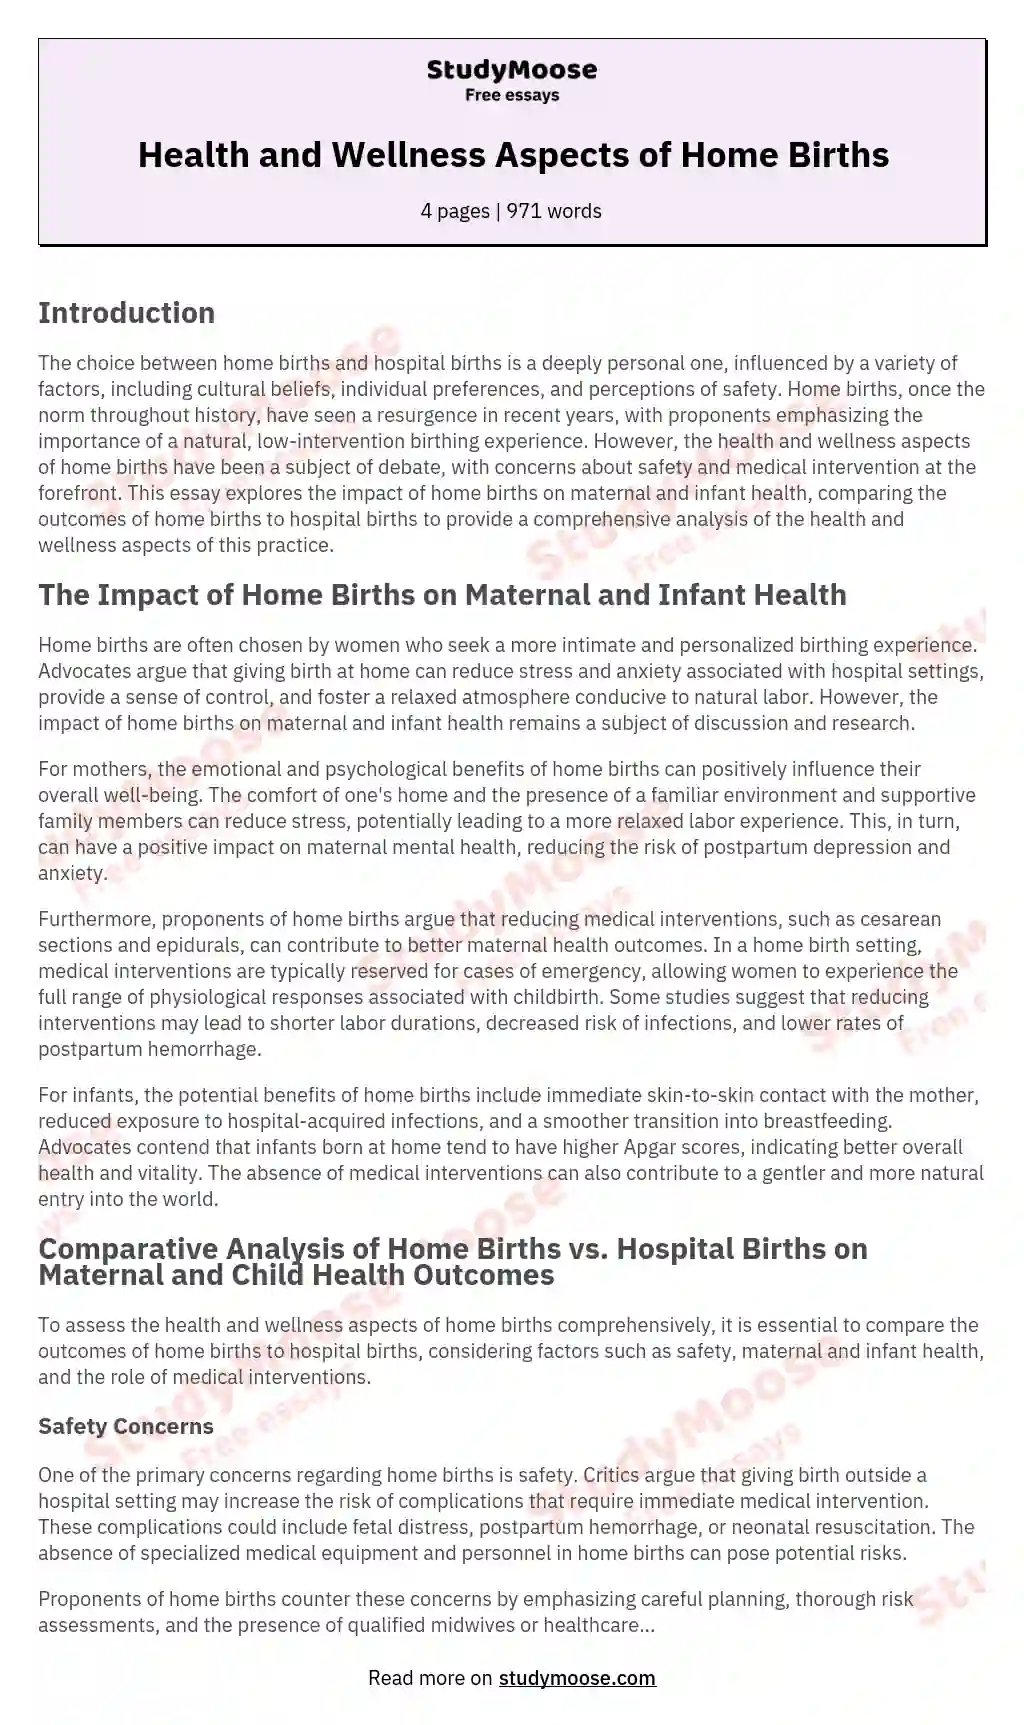 Health and Wellness Aspects of Home Births essay